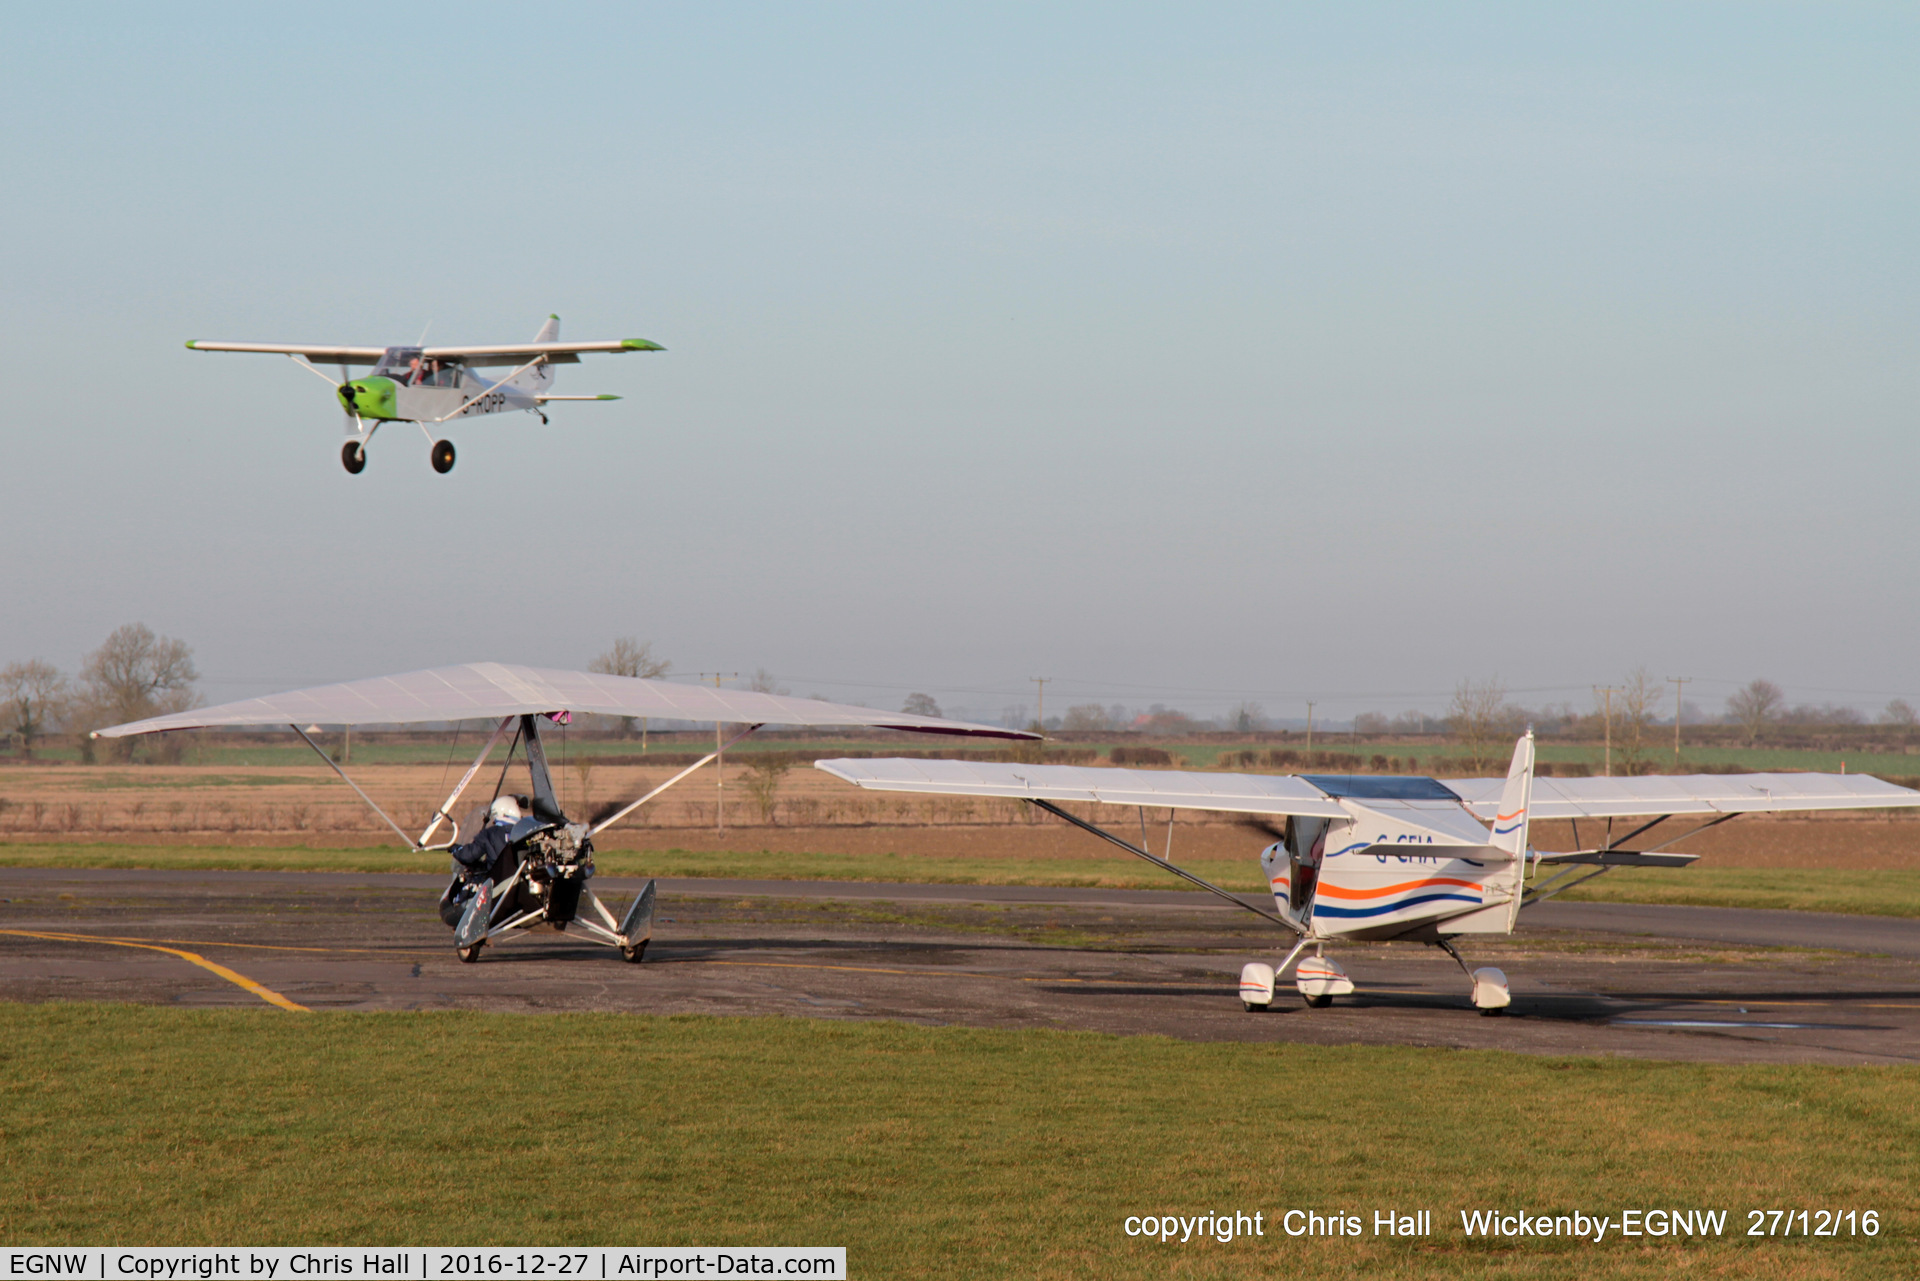 Wickenby Aerodrome Airport, Lincoln, England United Kingdom (EGNW) - at the Wickenby 